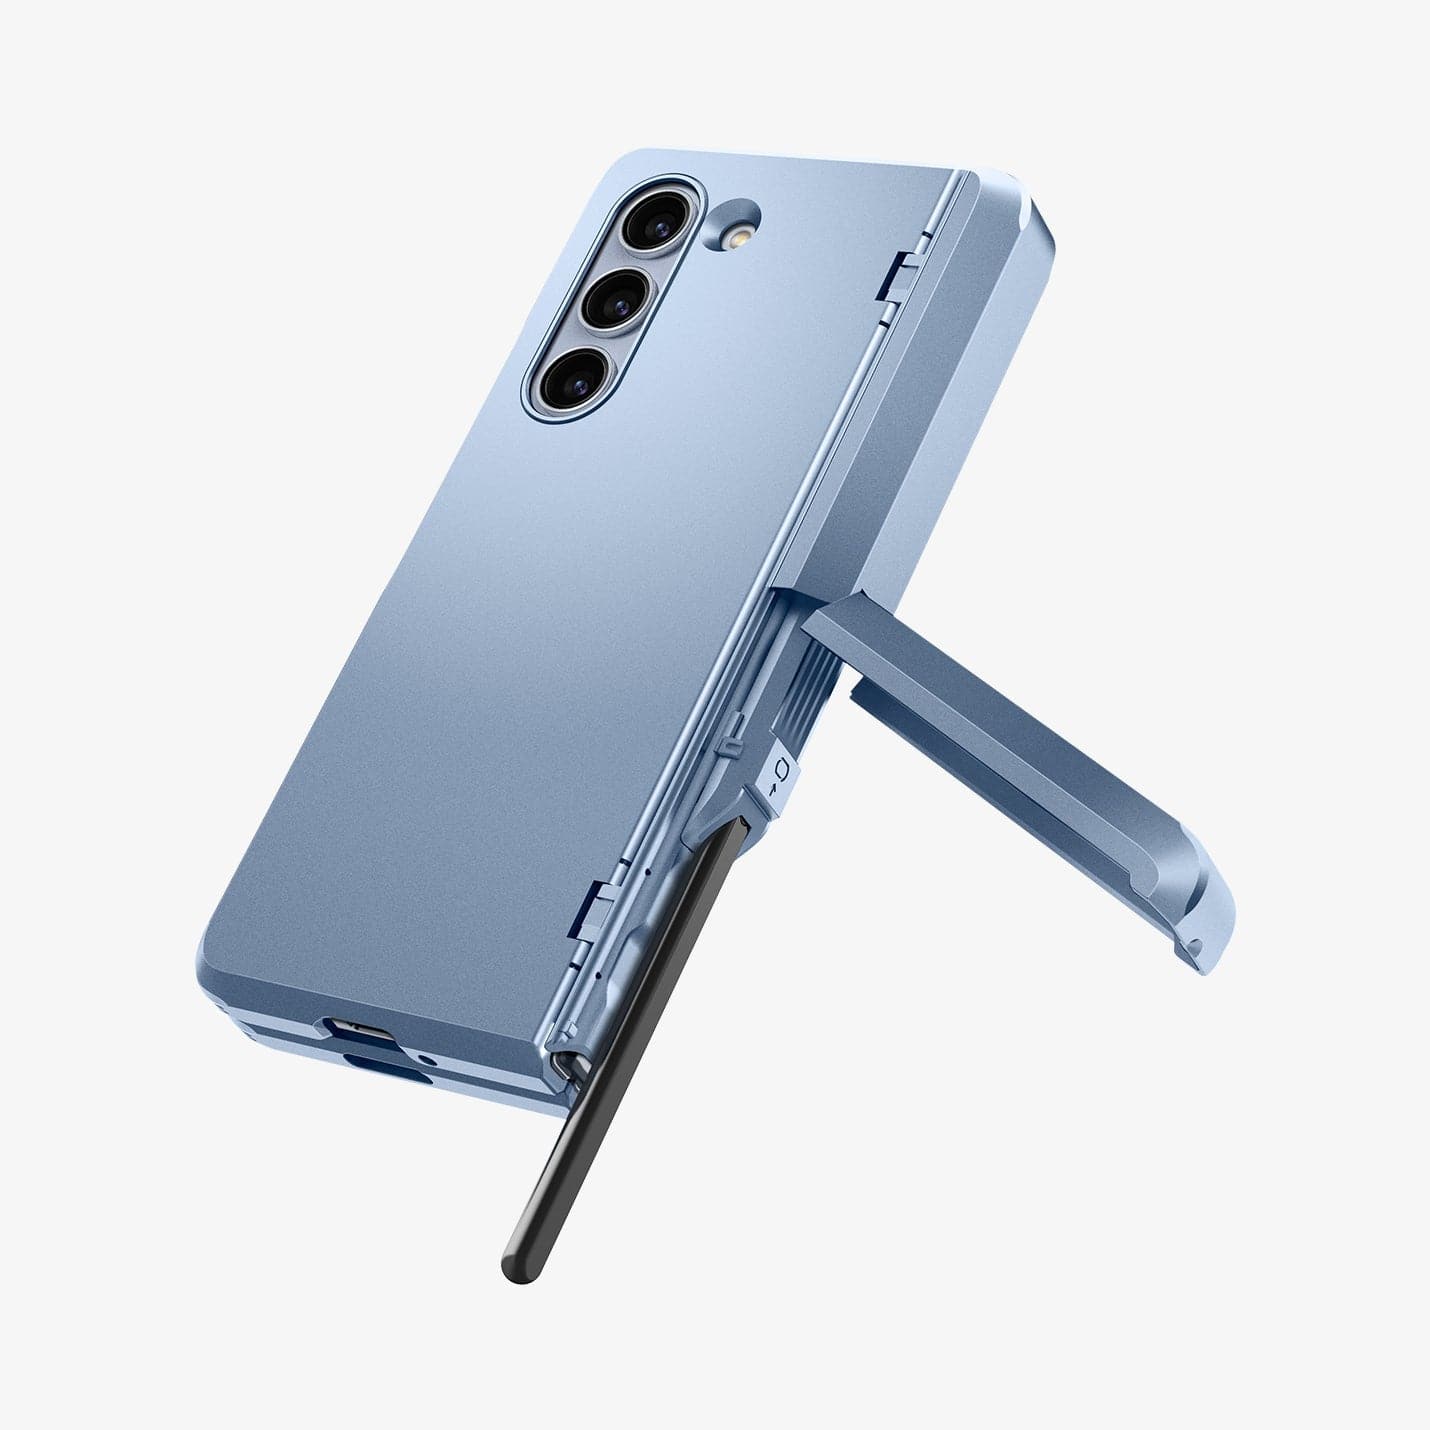 ACS06870 - Galaxy Z Fold 5 Case Tough Armor Pro P in sierra blue showing the back with kickstand extended out and pen sticking out of slot